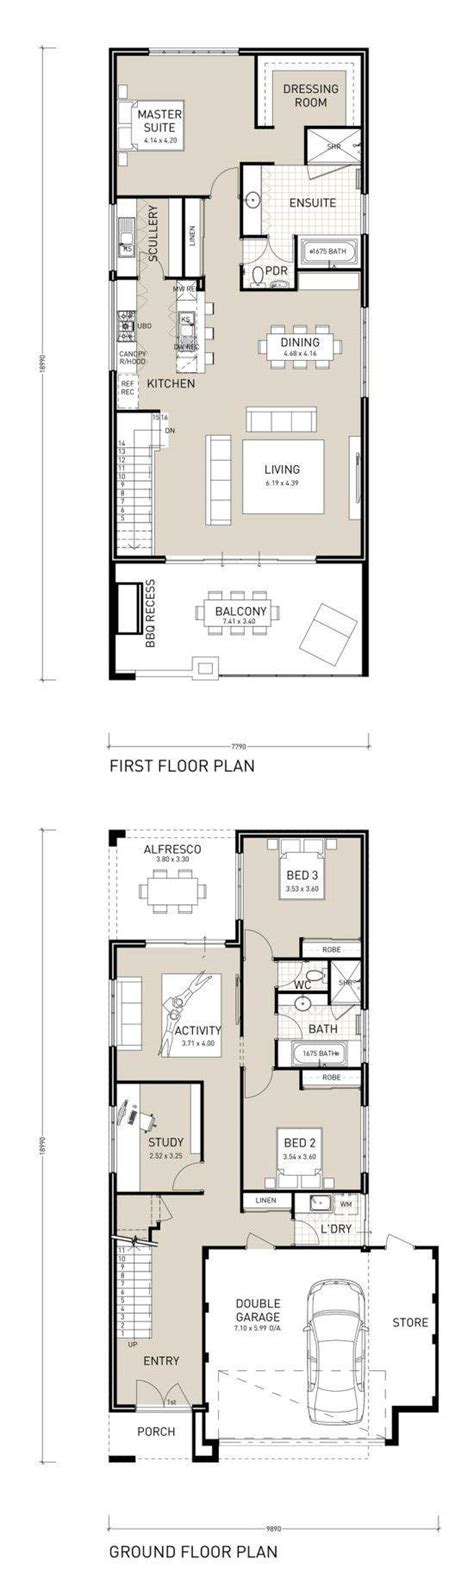 Home plans stamped not for construction for cost estimating and bidding purposes only; Adorable Best Reverse Living House Plans - House Plans | #157643